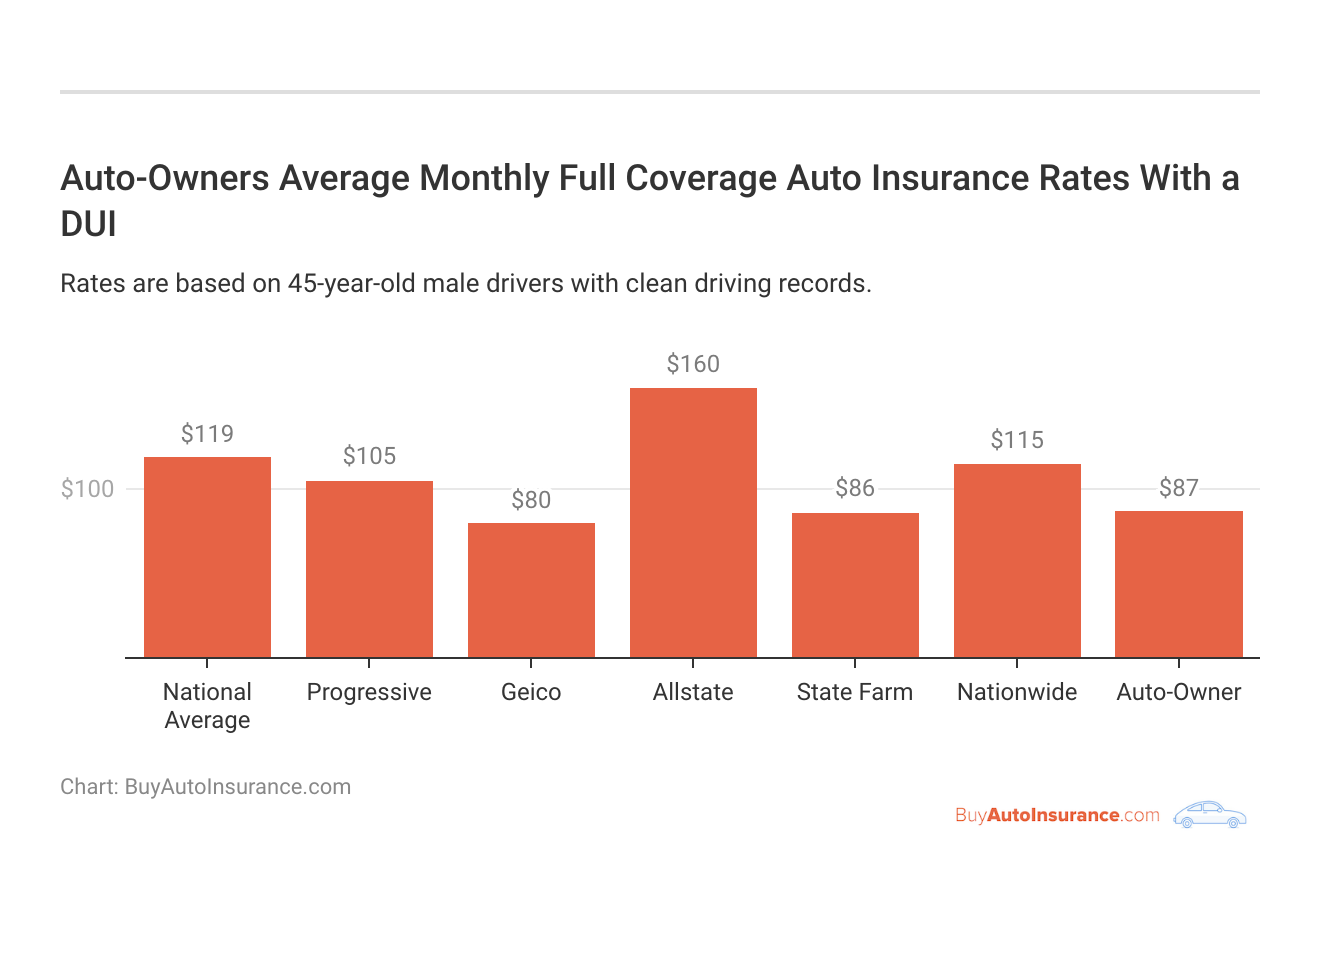 <h3>Auto-Owners Average Monthly Full Coverage Auto Insurance Rates With a DUI</h3>